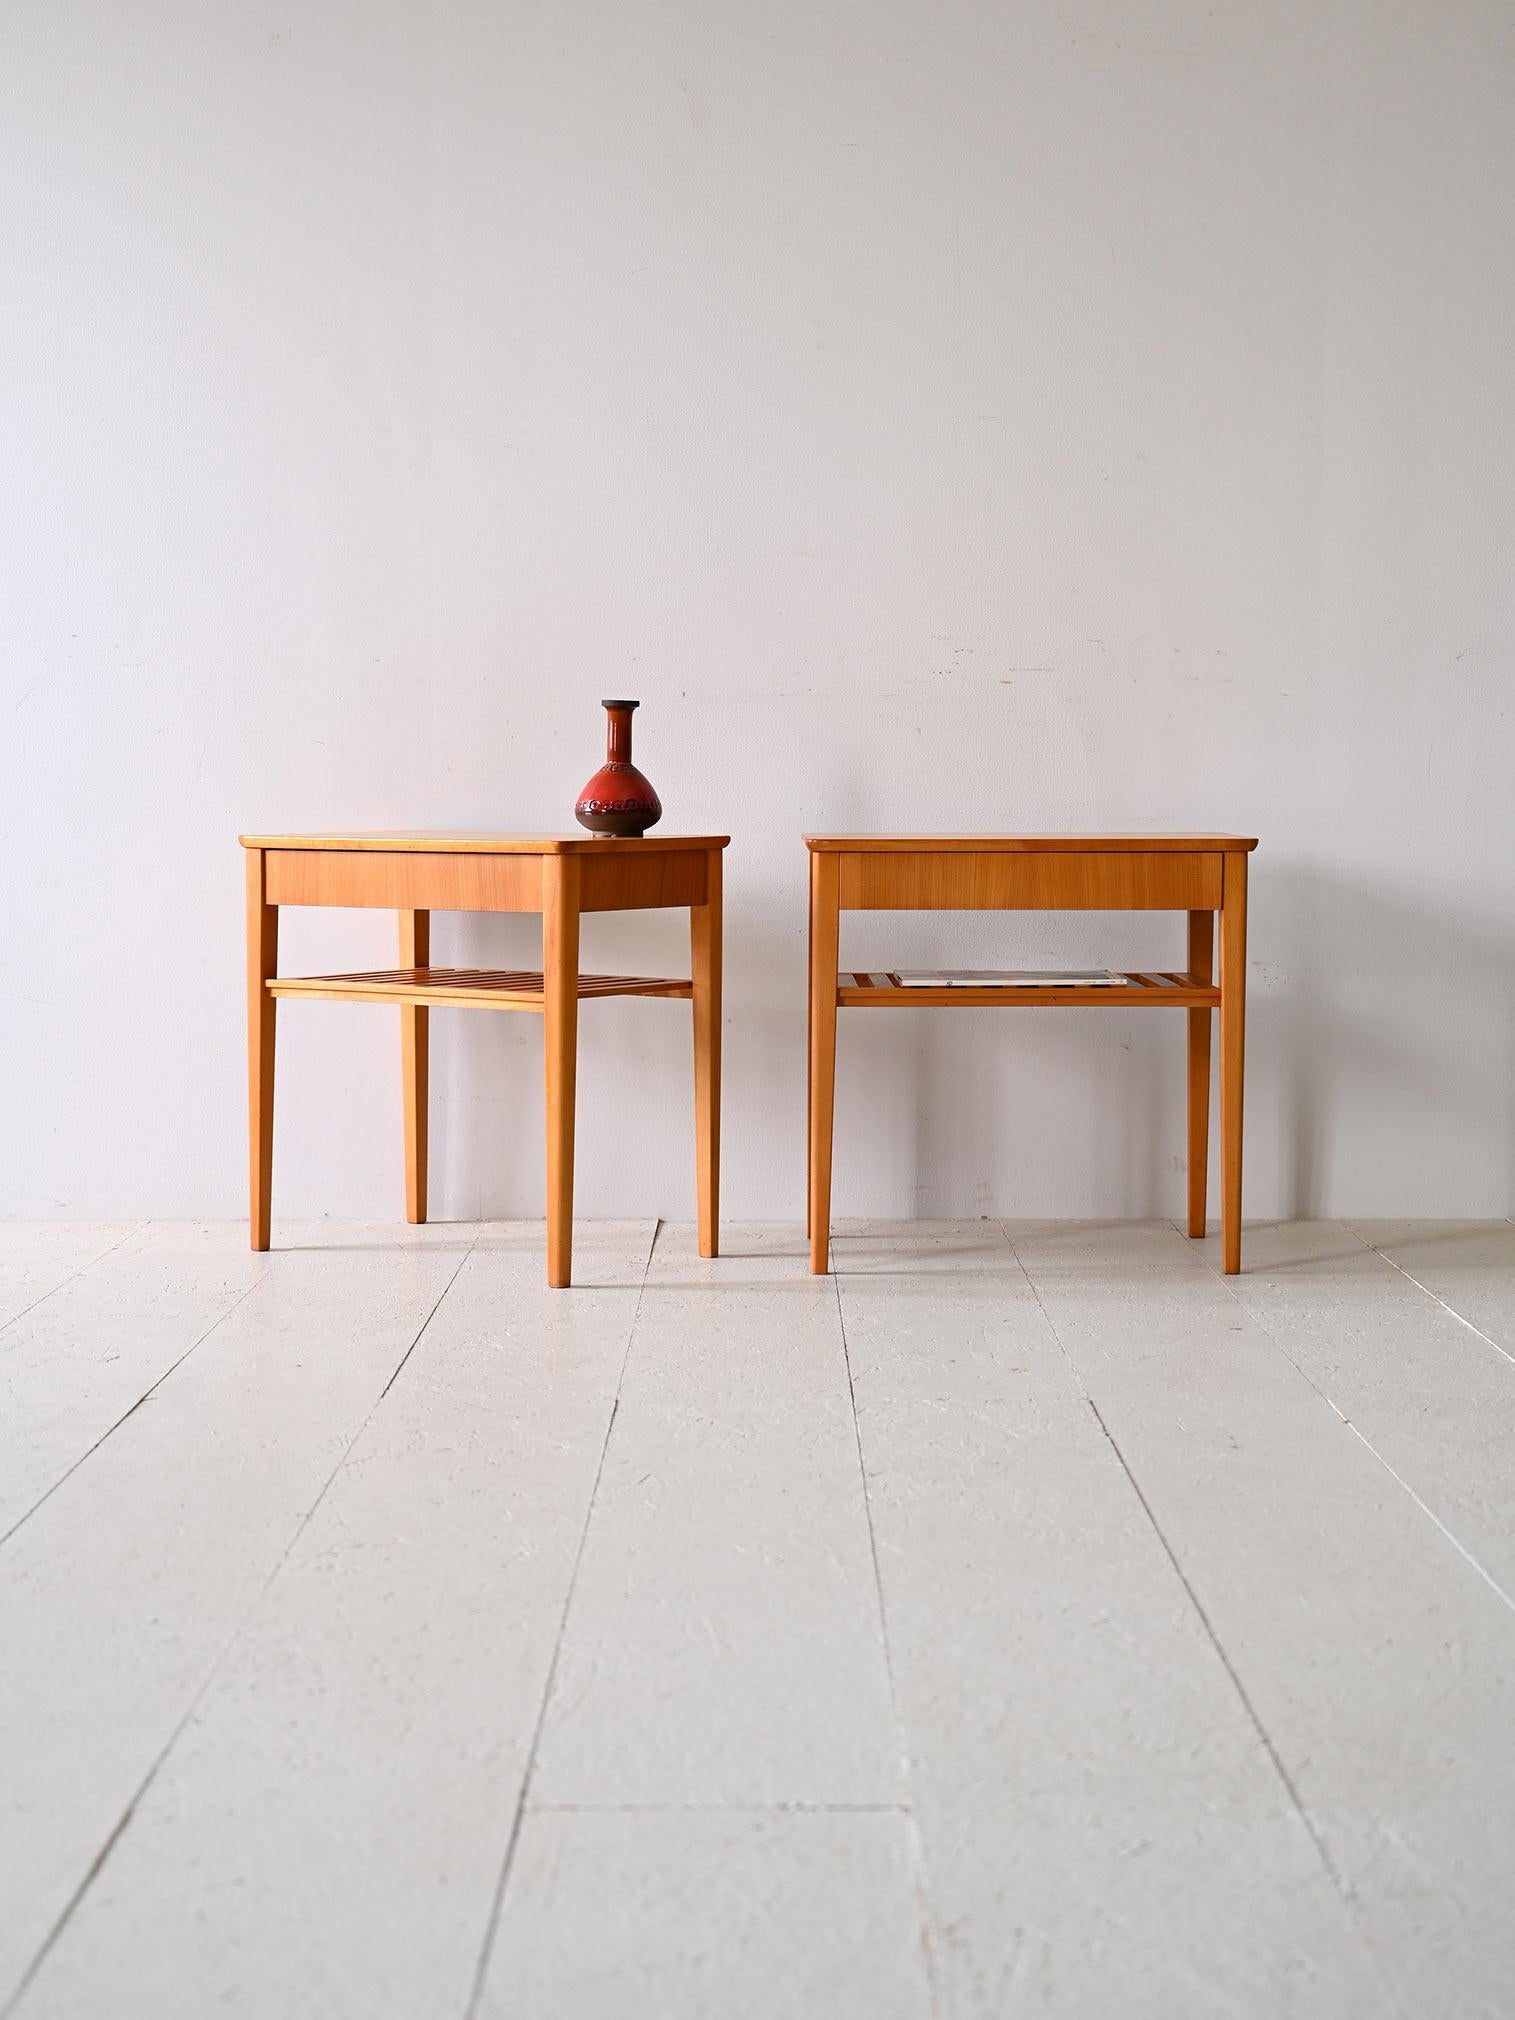 Pair of original Scandinavian side tables/nightstands from the 1960s.

Elegant and functional, this pair of nightstands embodies the Nordic style with extremely simple and clean lines featuring a minimal and classic design. Each nightstand features